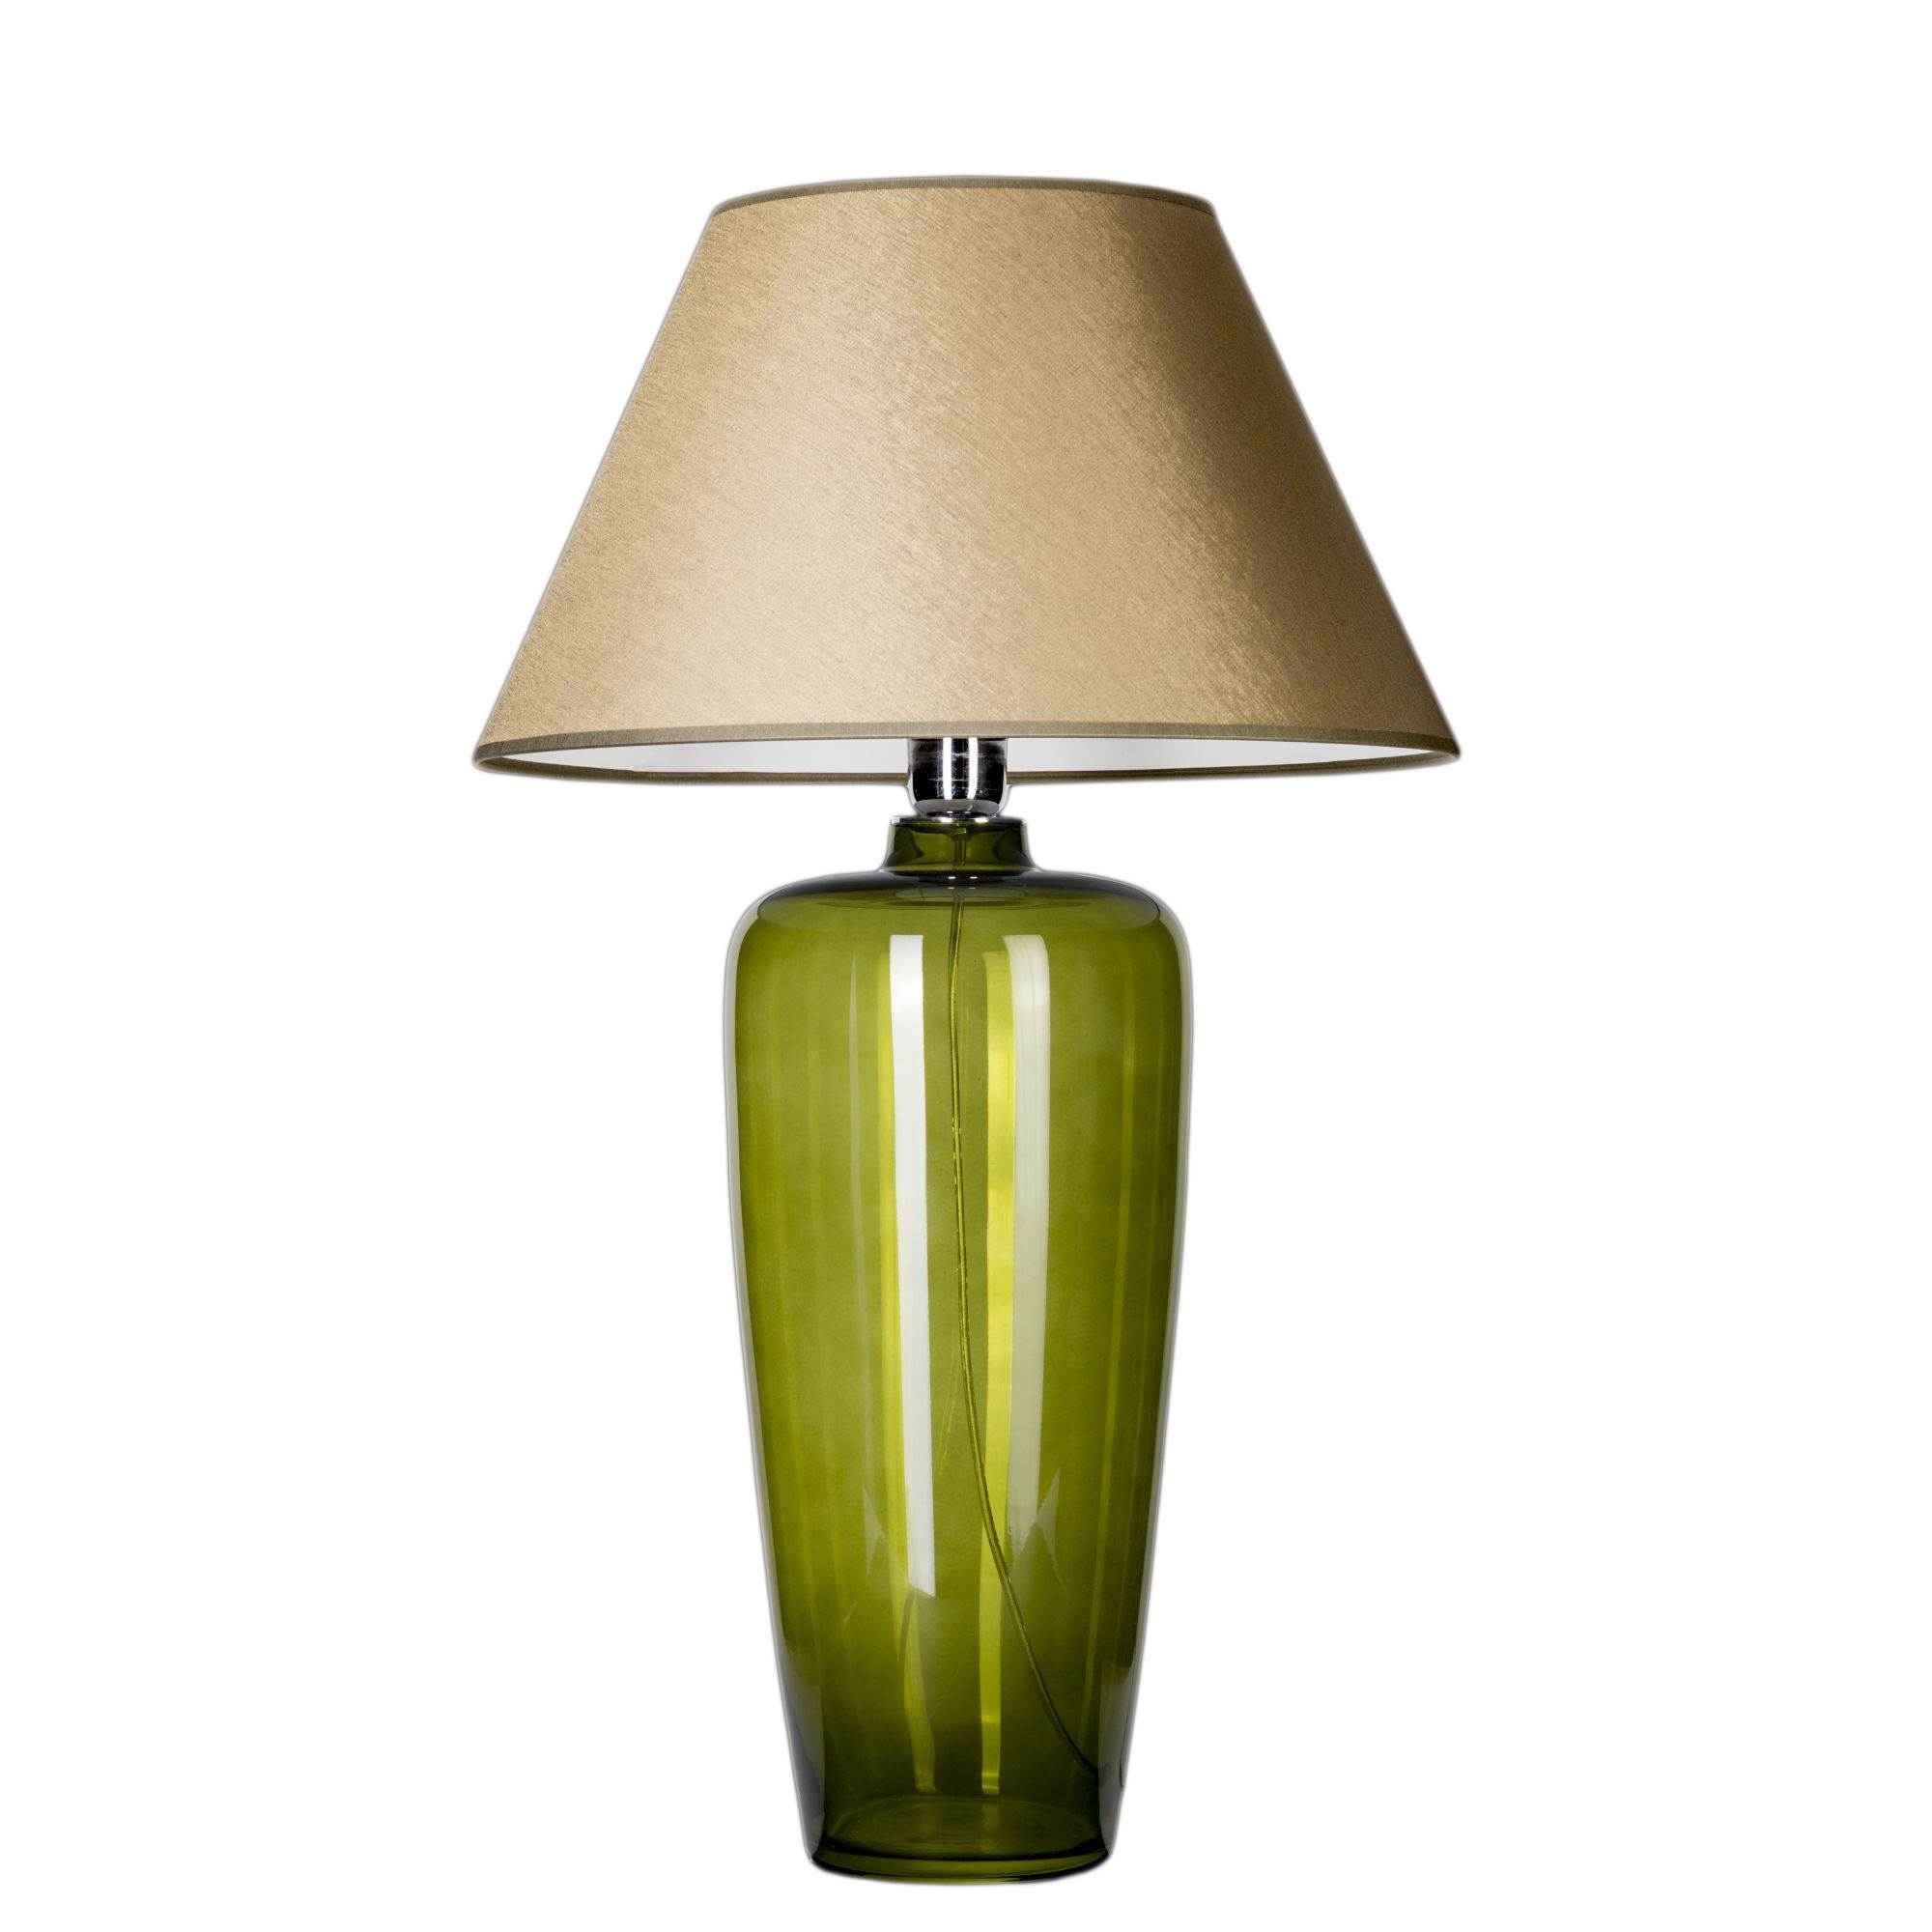 4 Concepts Bilbao Green Glass Table, Yellow Bedside Table Lamps Uk